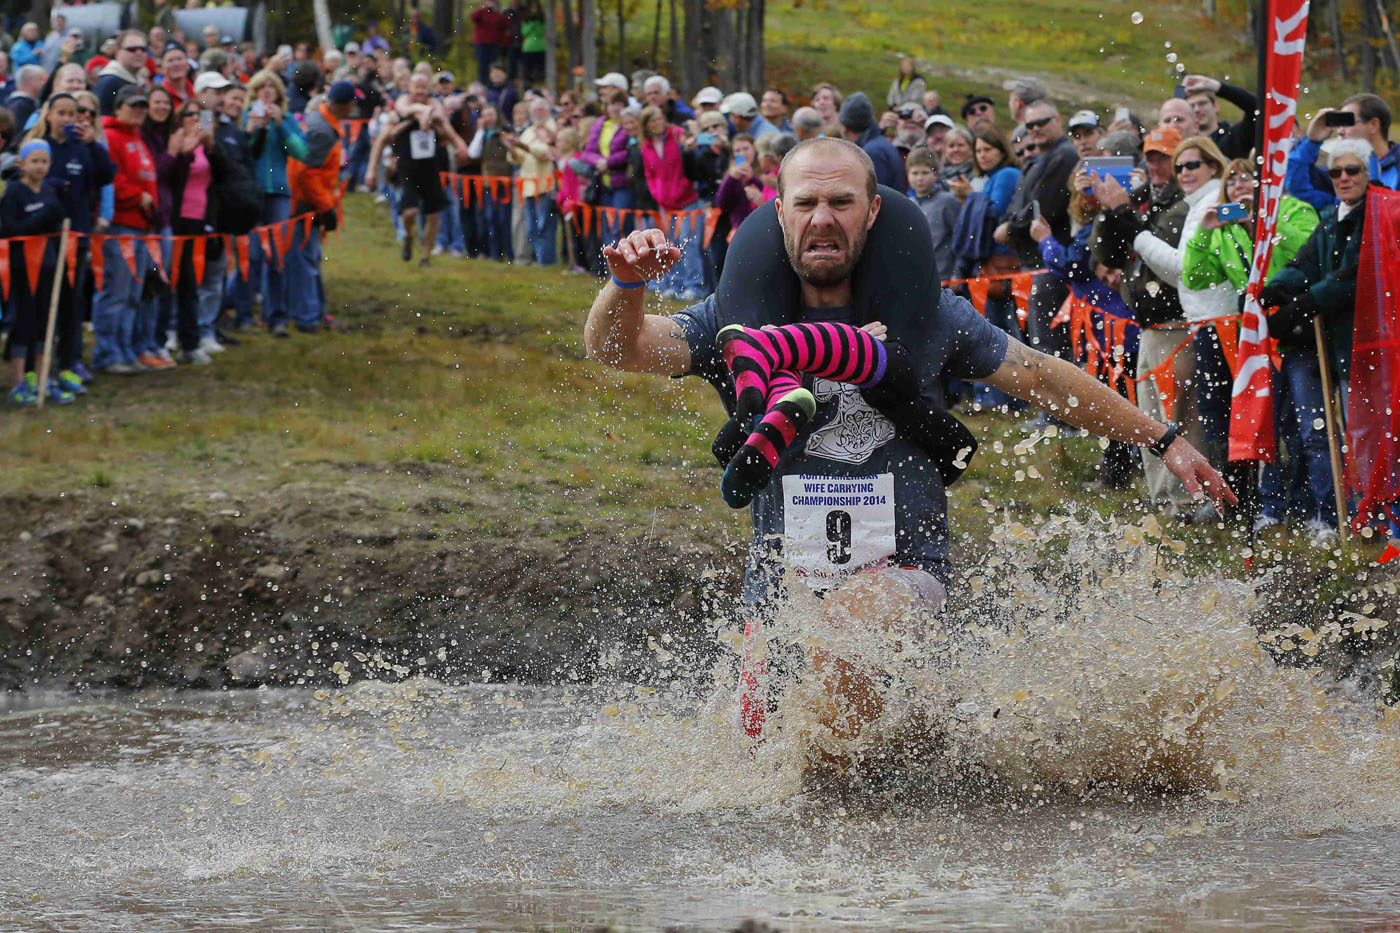 Eventual winners Jesse Wall carries Christina Arsenault through the water pit while competing in the North American Wife Carrying Championship at Sunday River ski resort in Newry, Maine on Oct. 11.